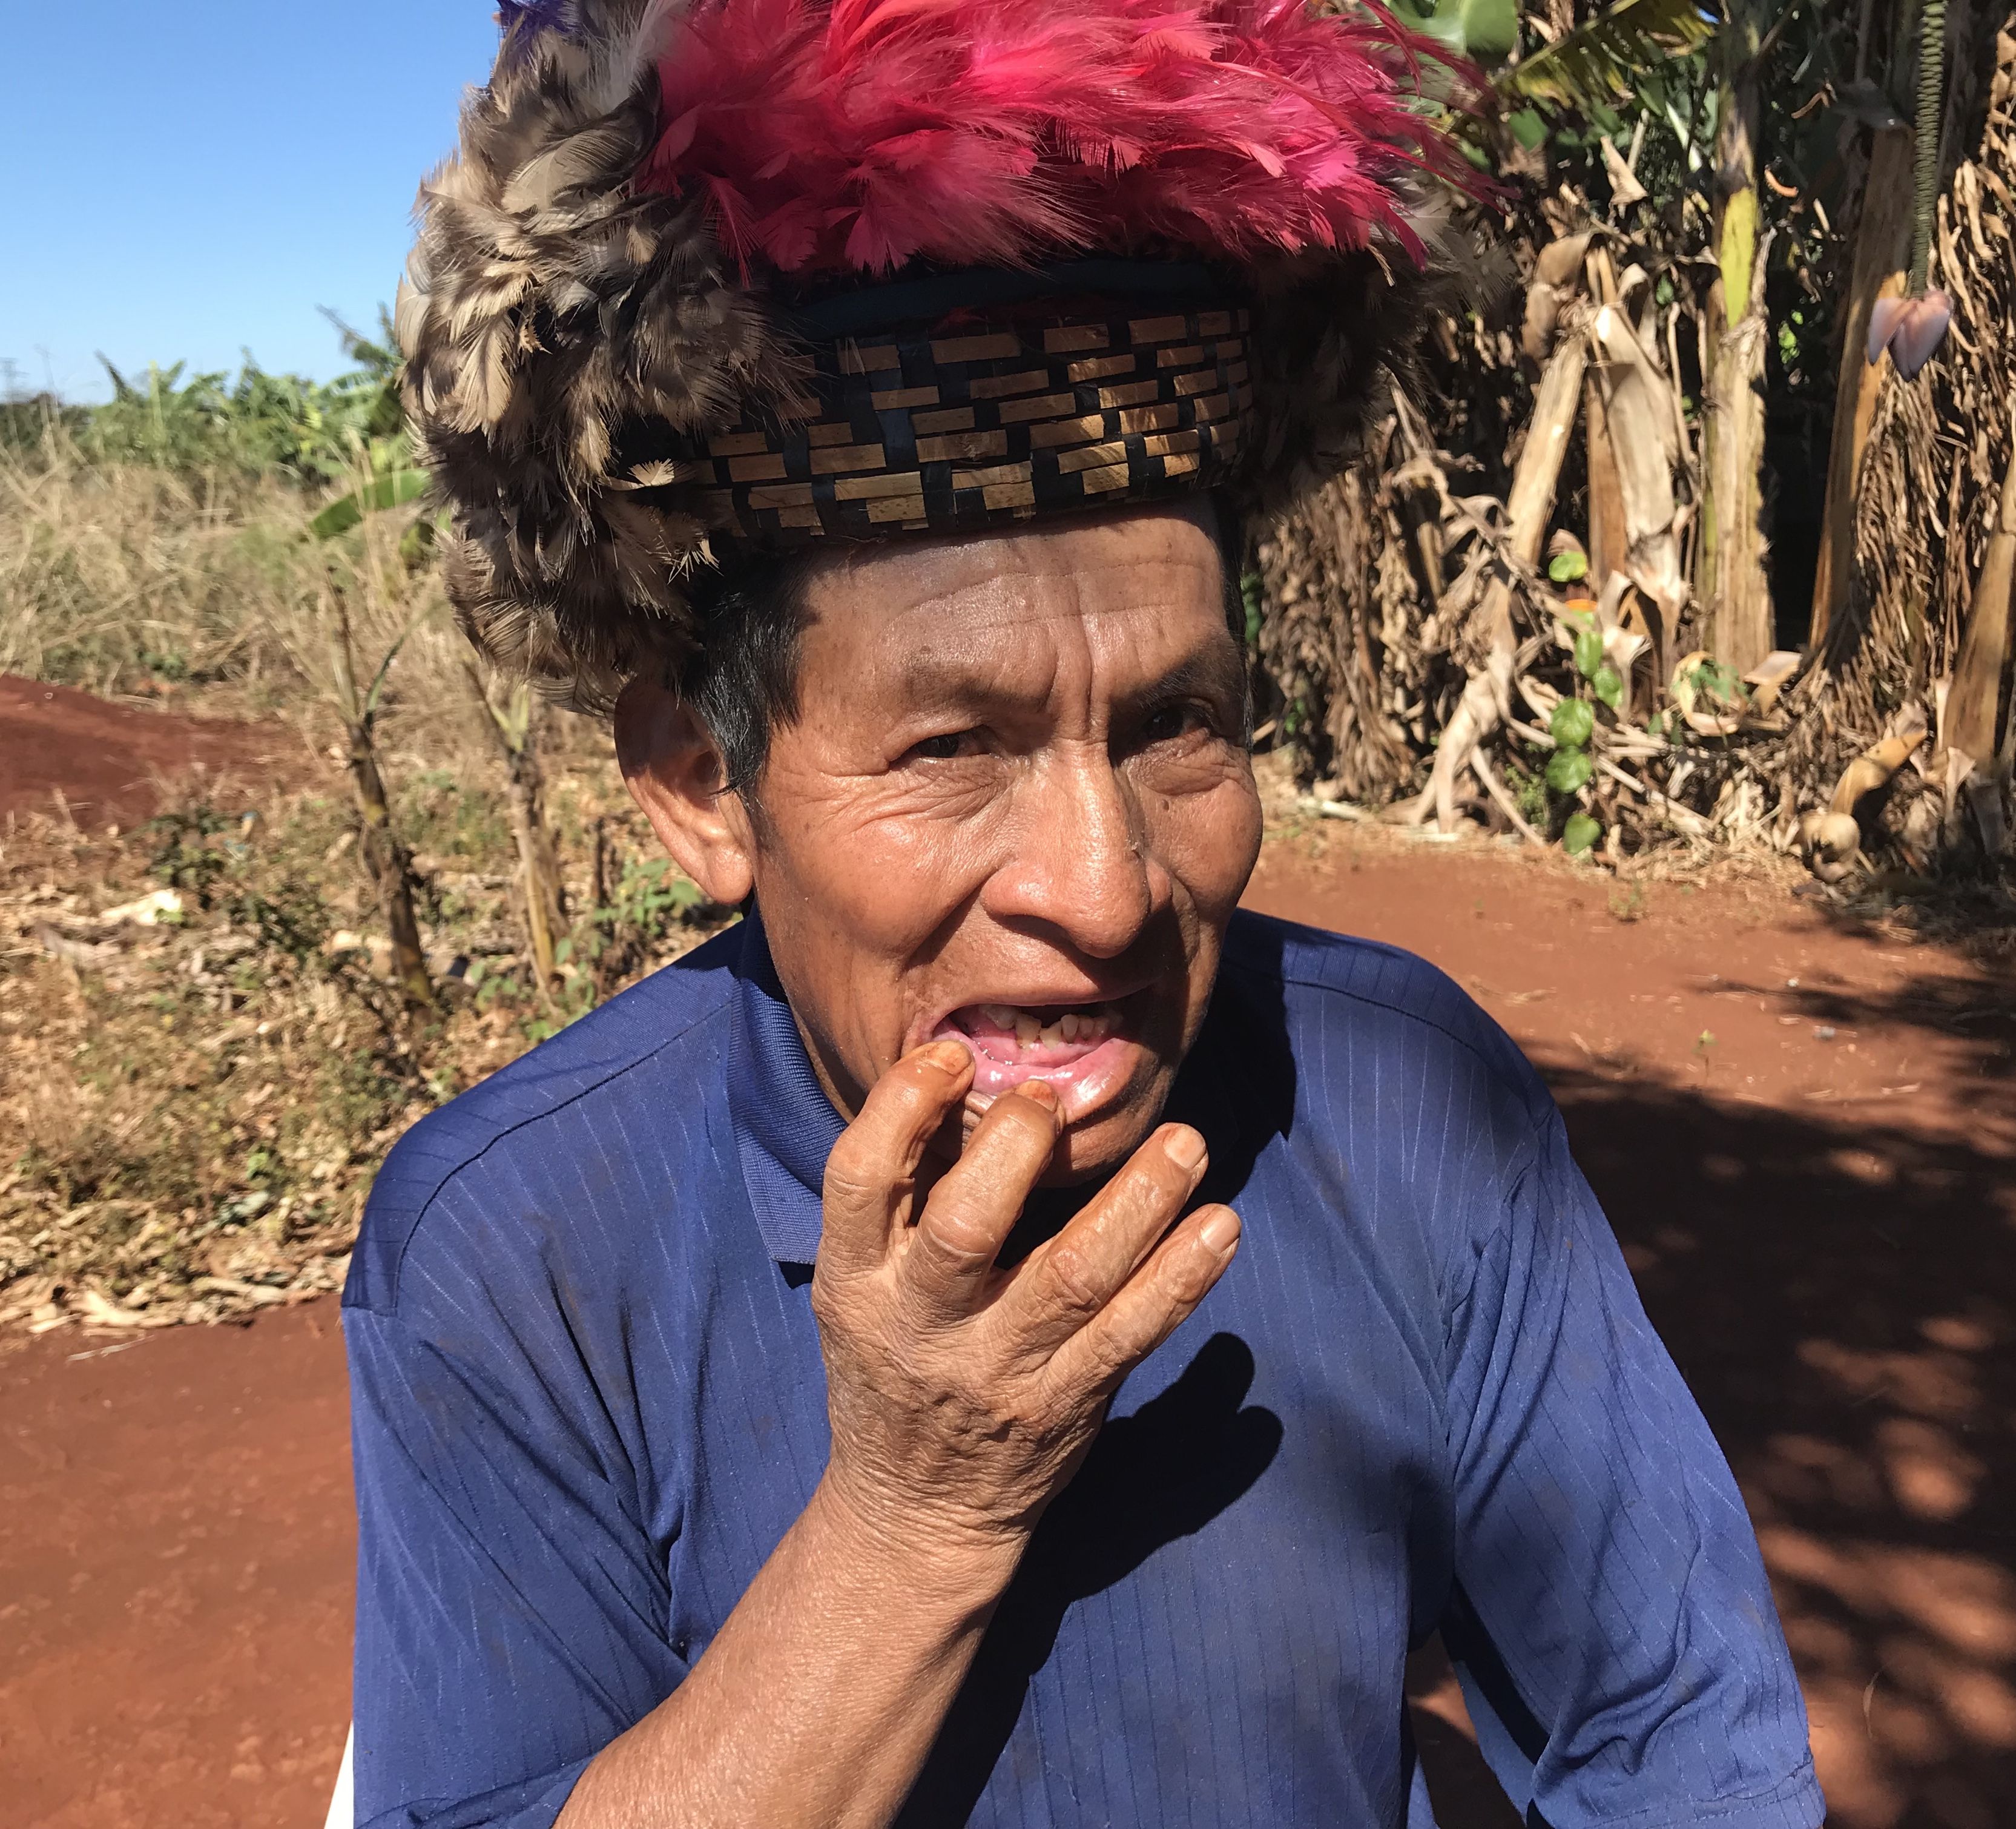 Cacique Ambrosio Ricardi (Guarani-Kaiowá) shows his broken jaw and teeth. Both are results of an assault to his settlement in the outskirts of Dourados, Mato Grosso do Sul. Image by Rafael Lima. Brazil, 2019.